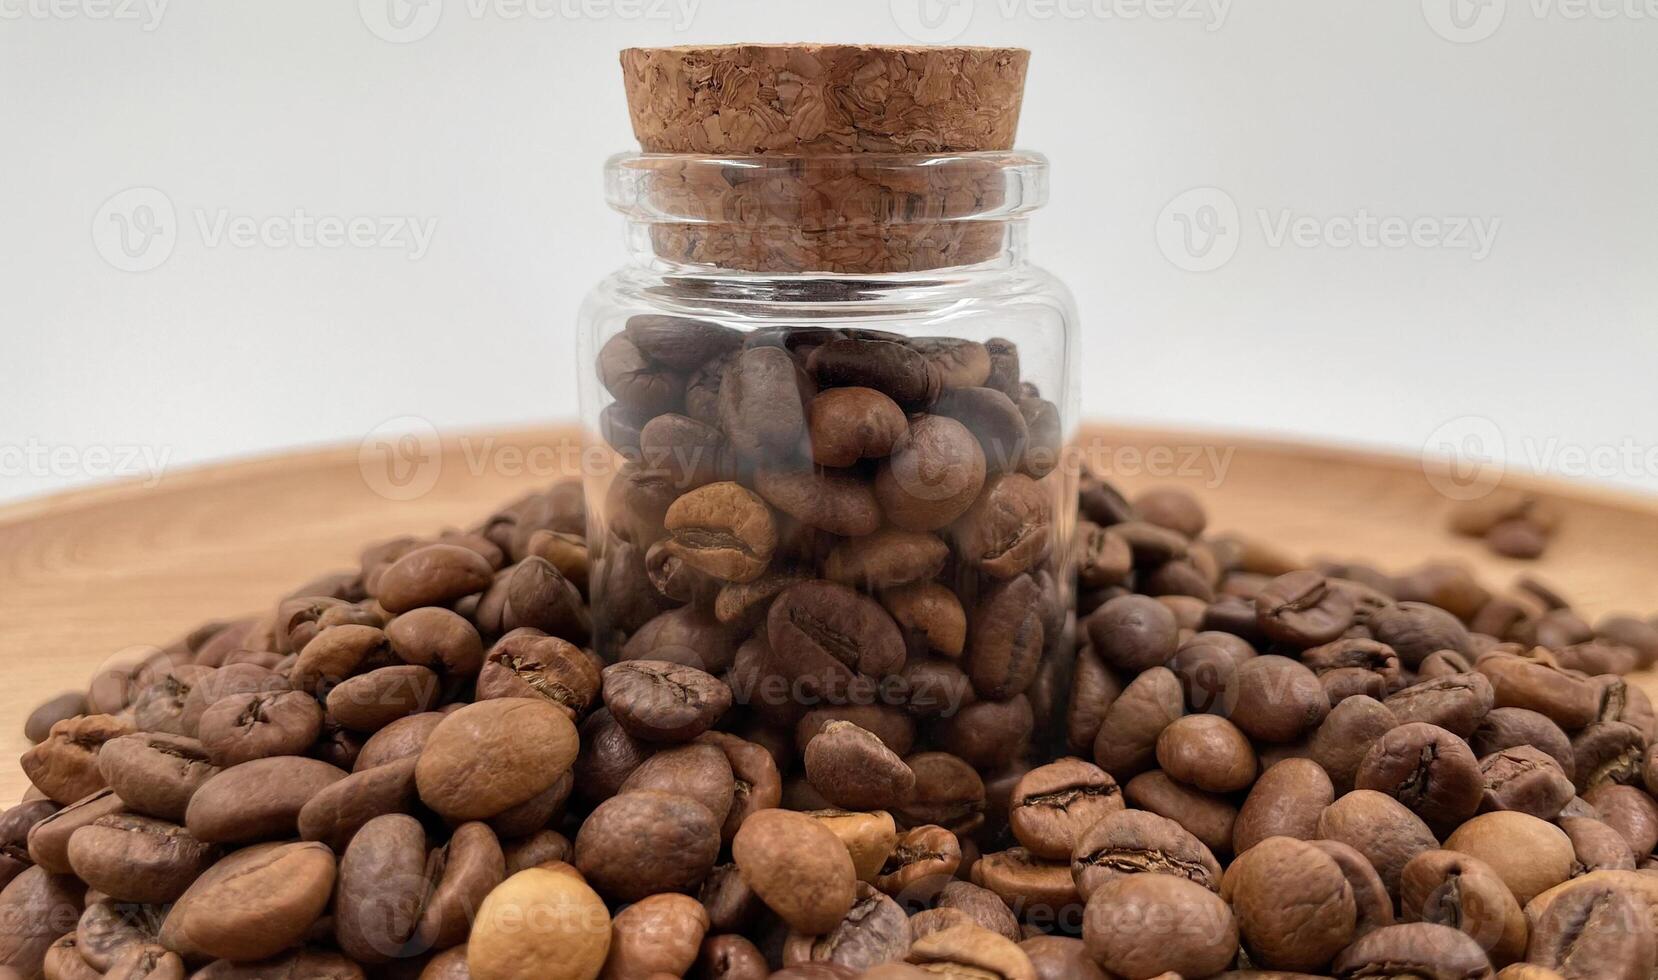 Coffee beans in a small glass jar with a cork lid on the table. Coffee beans packed in a transparent, airtight storage container. Coffee seeds inside a glass jar. photo